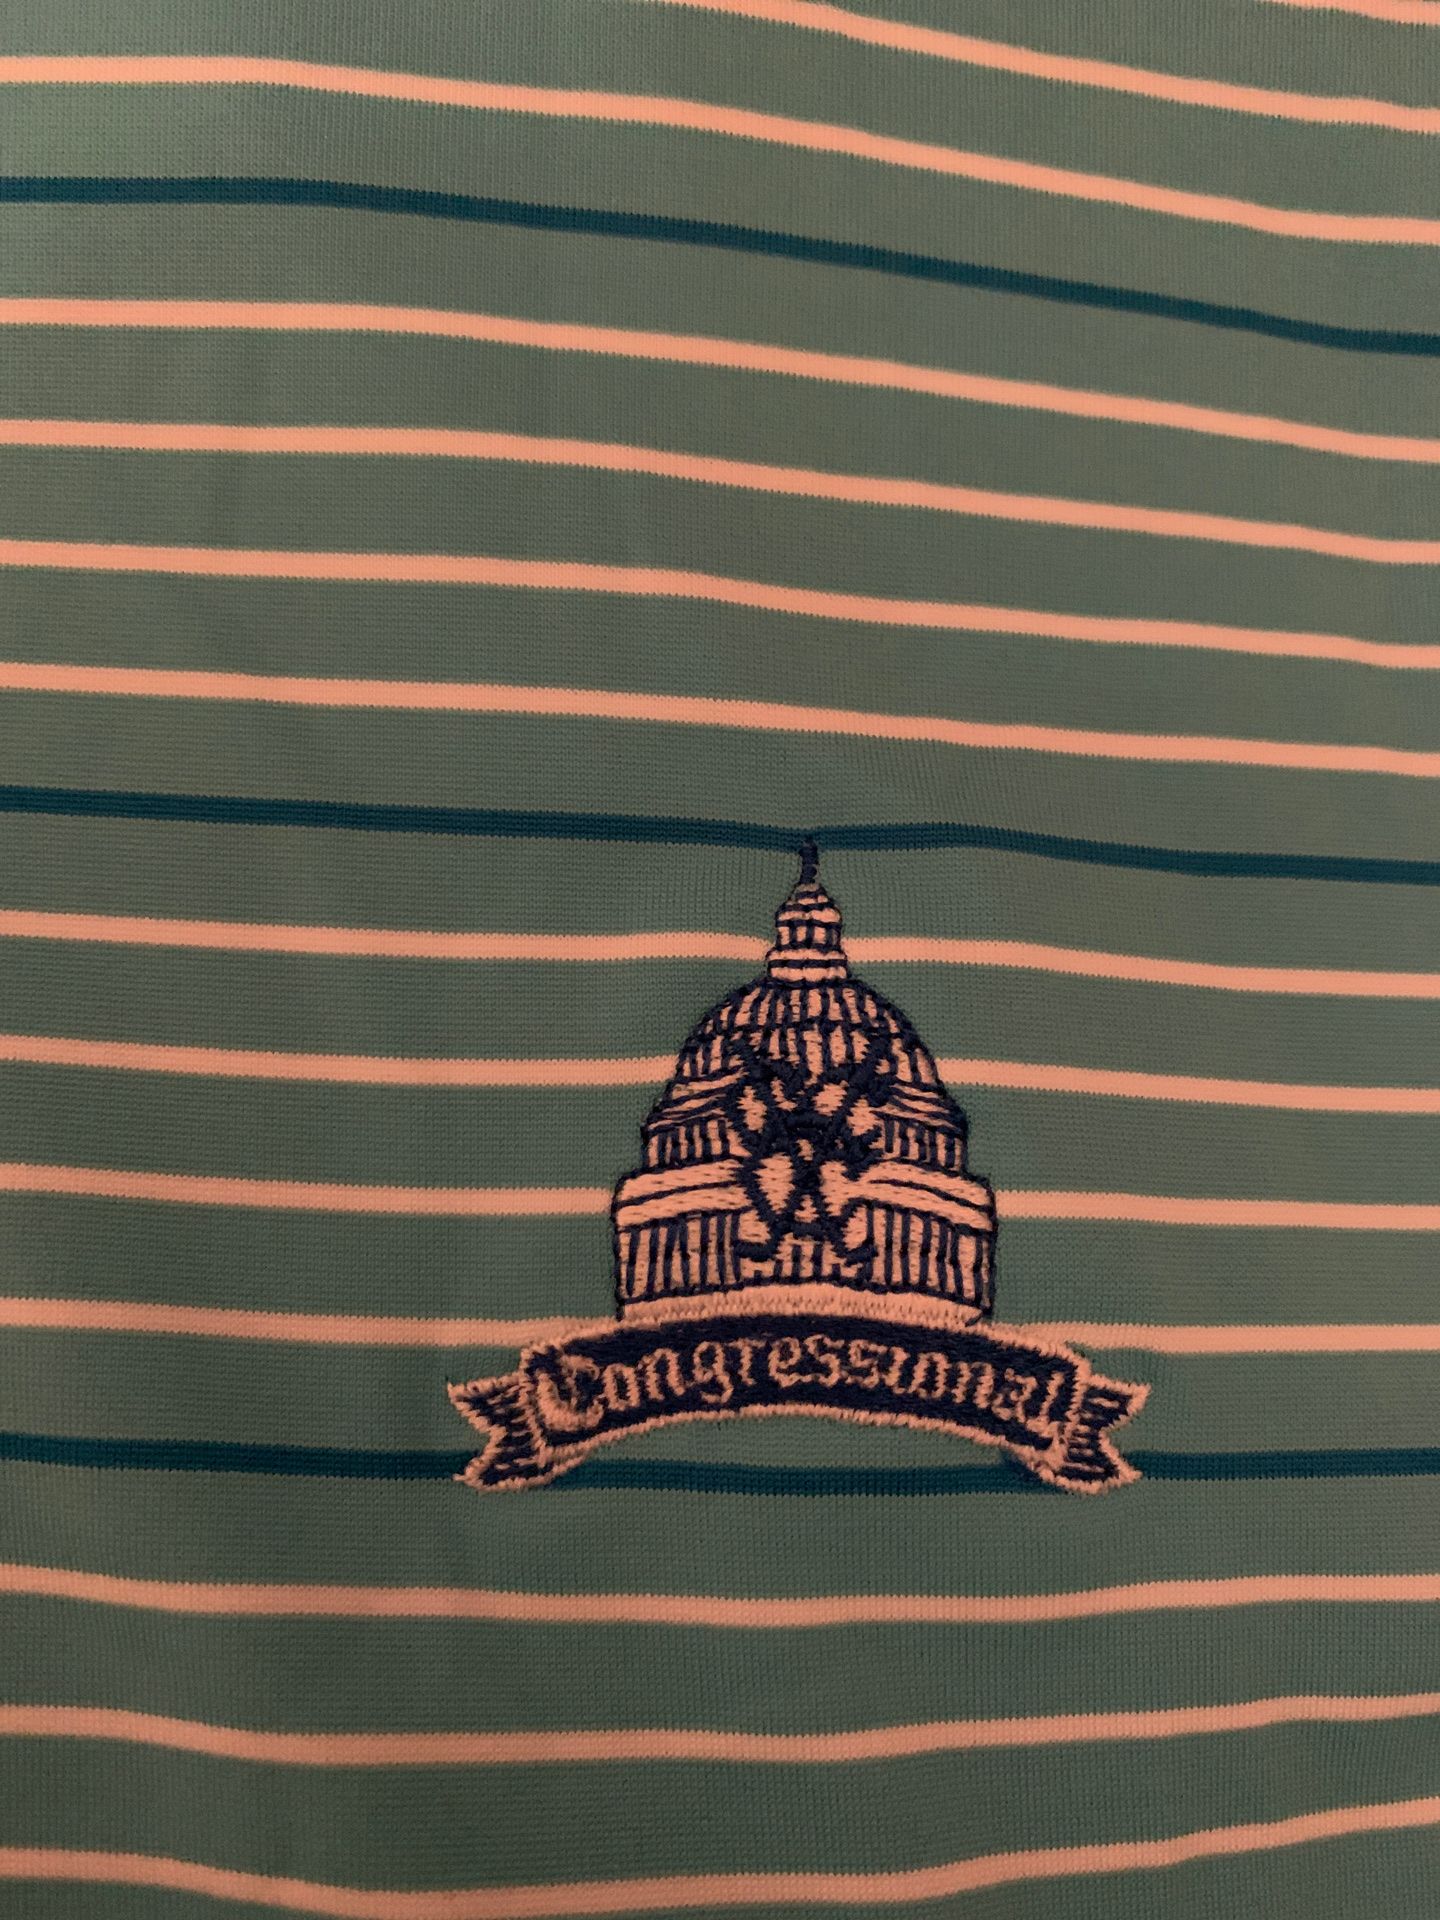 Vineyard vines congressional country club golf polo new